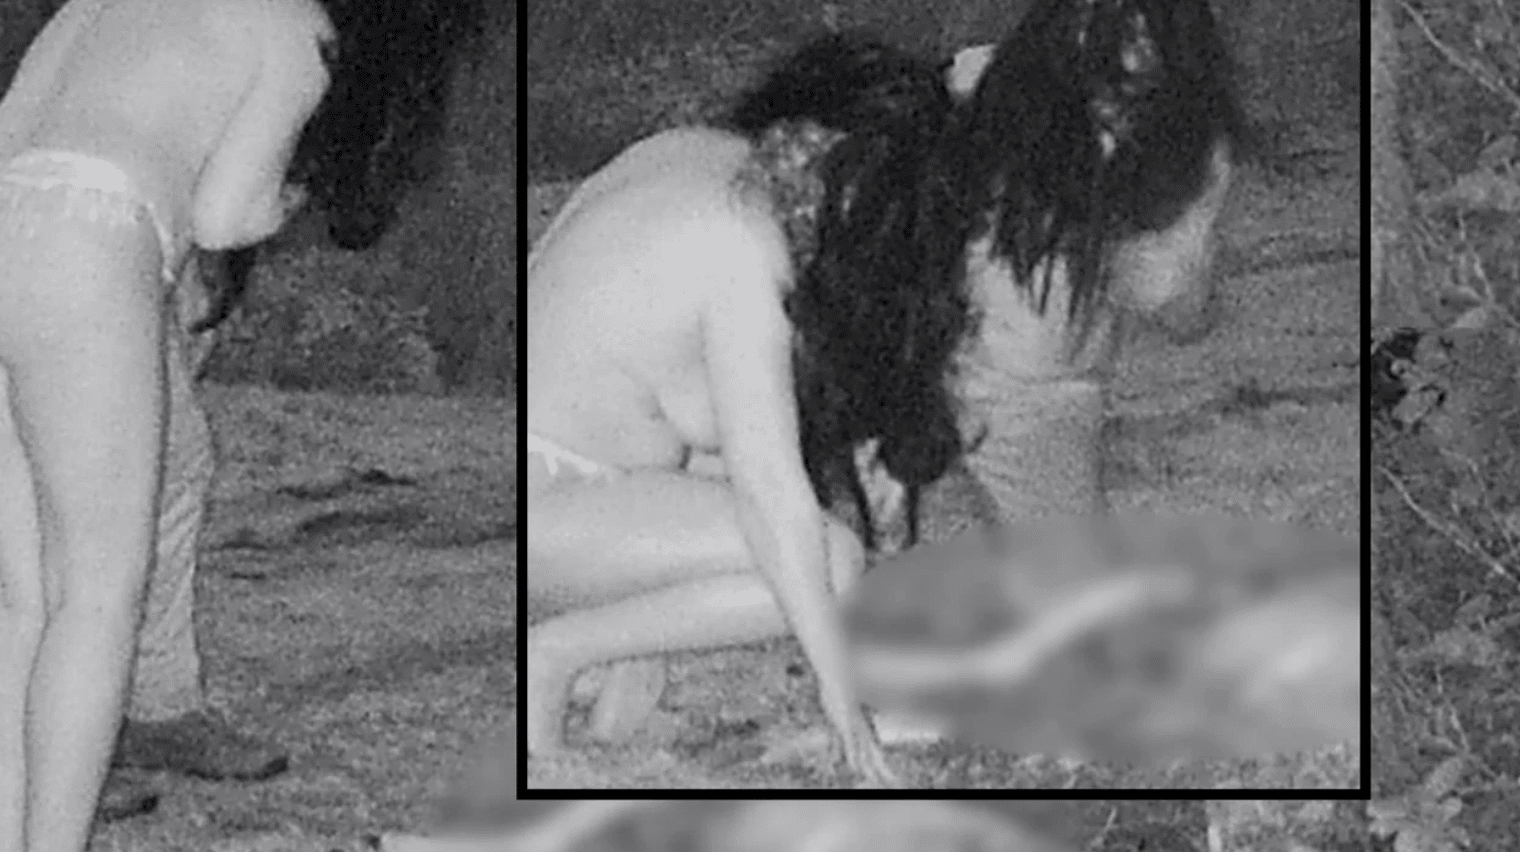 (WATCH) Nurse captures ‘witches holding carcass-eating ritual’ on security camera